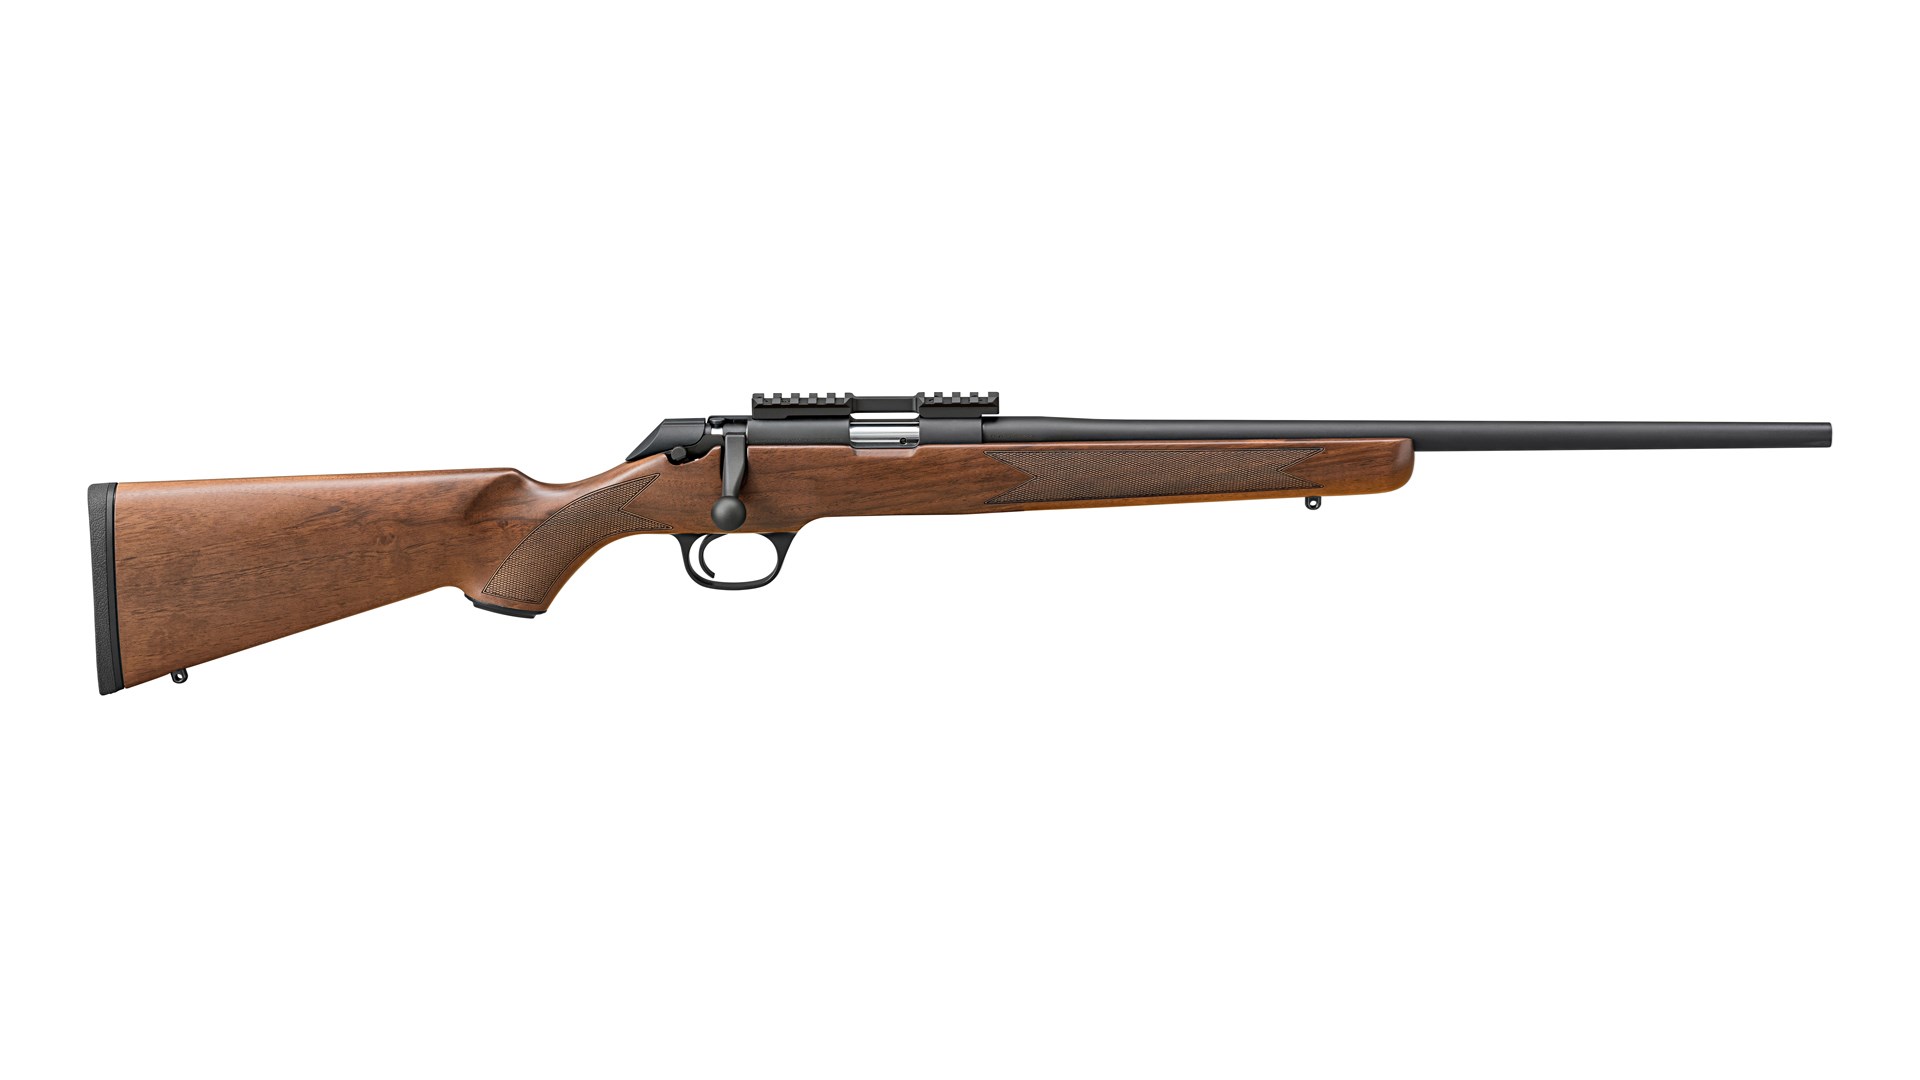 Right side of the wood-stocked Springfield Model 2020 Rimfire Classic rifle.